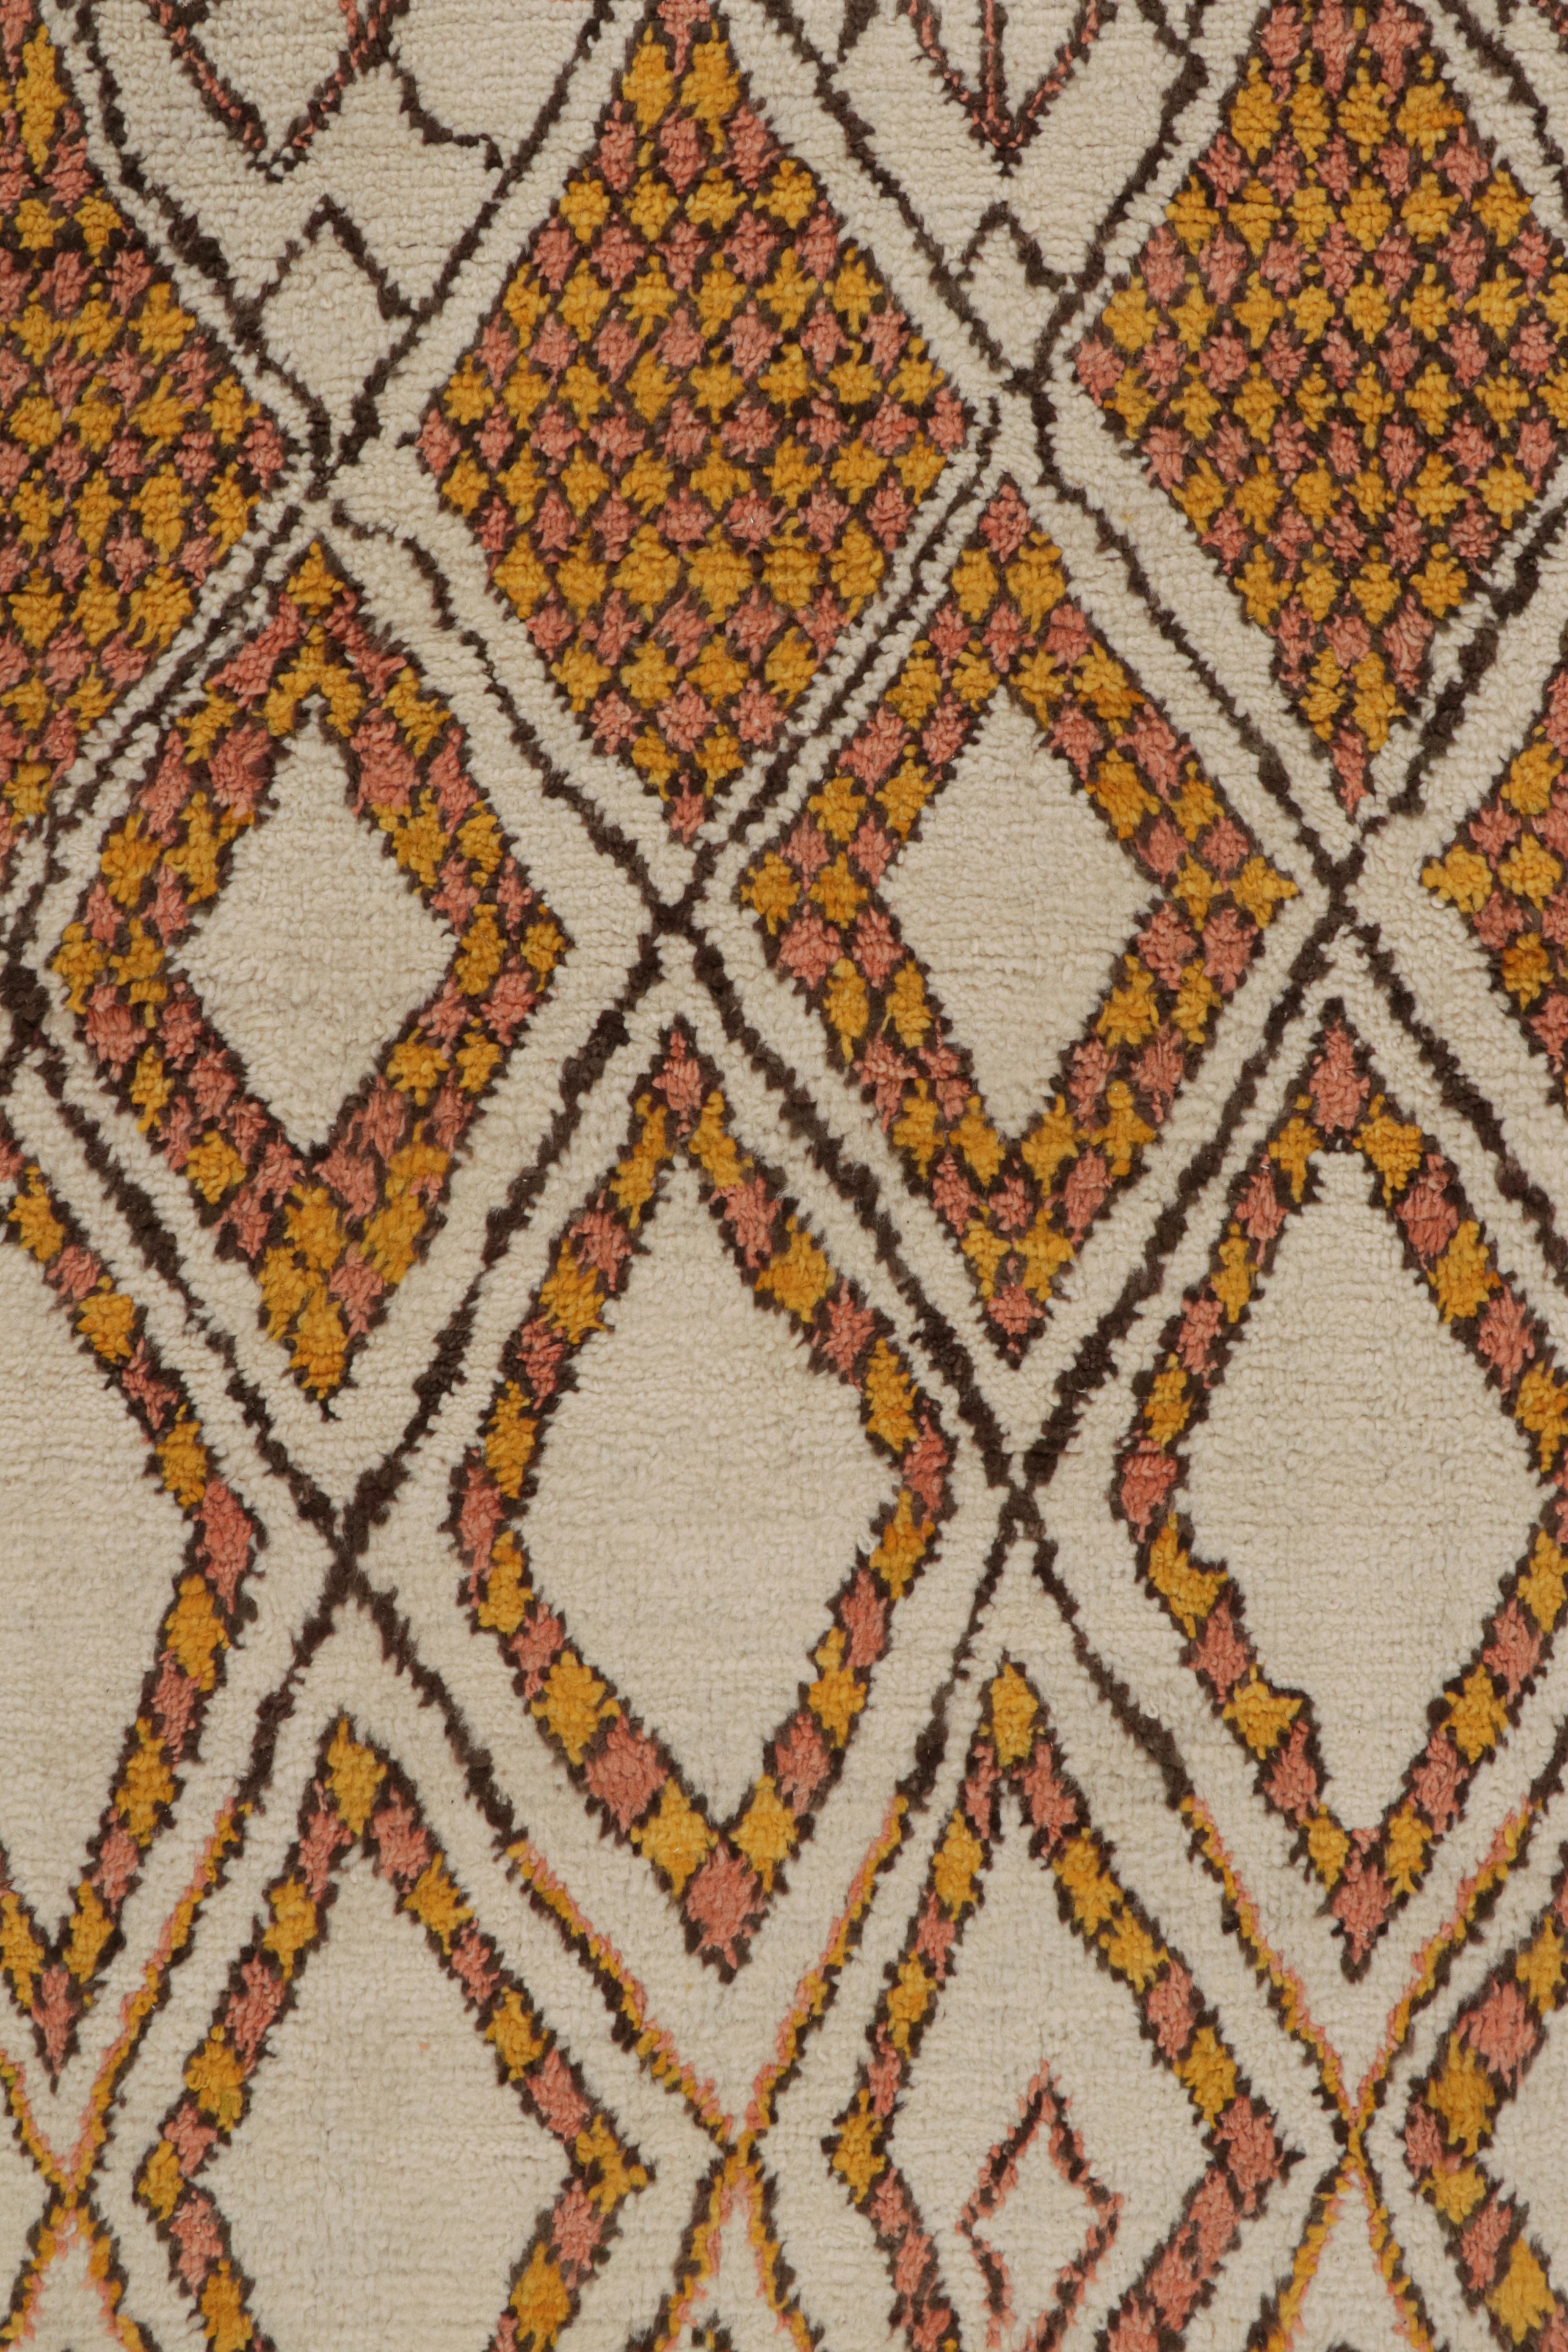 Rug & Kilim’s Moroccan Style Rug in Beige-Brown & Orange Geometric Patterns In New Condition For Sale In Long Island City, NY